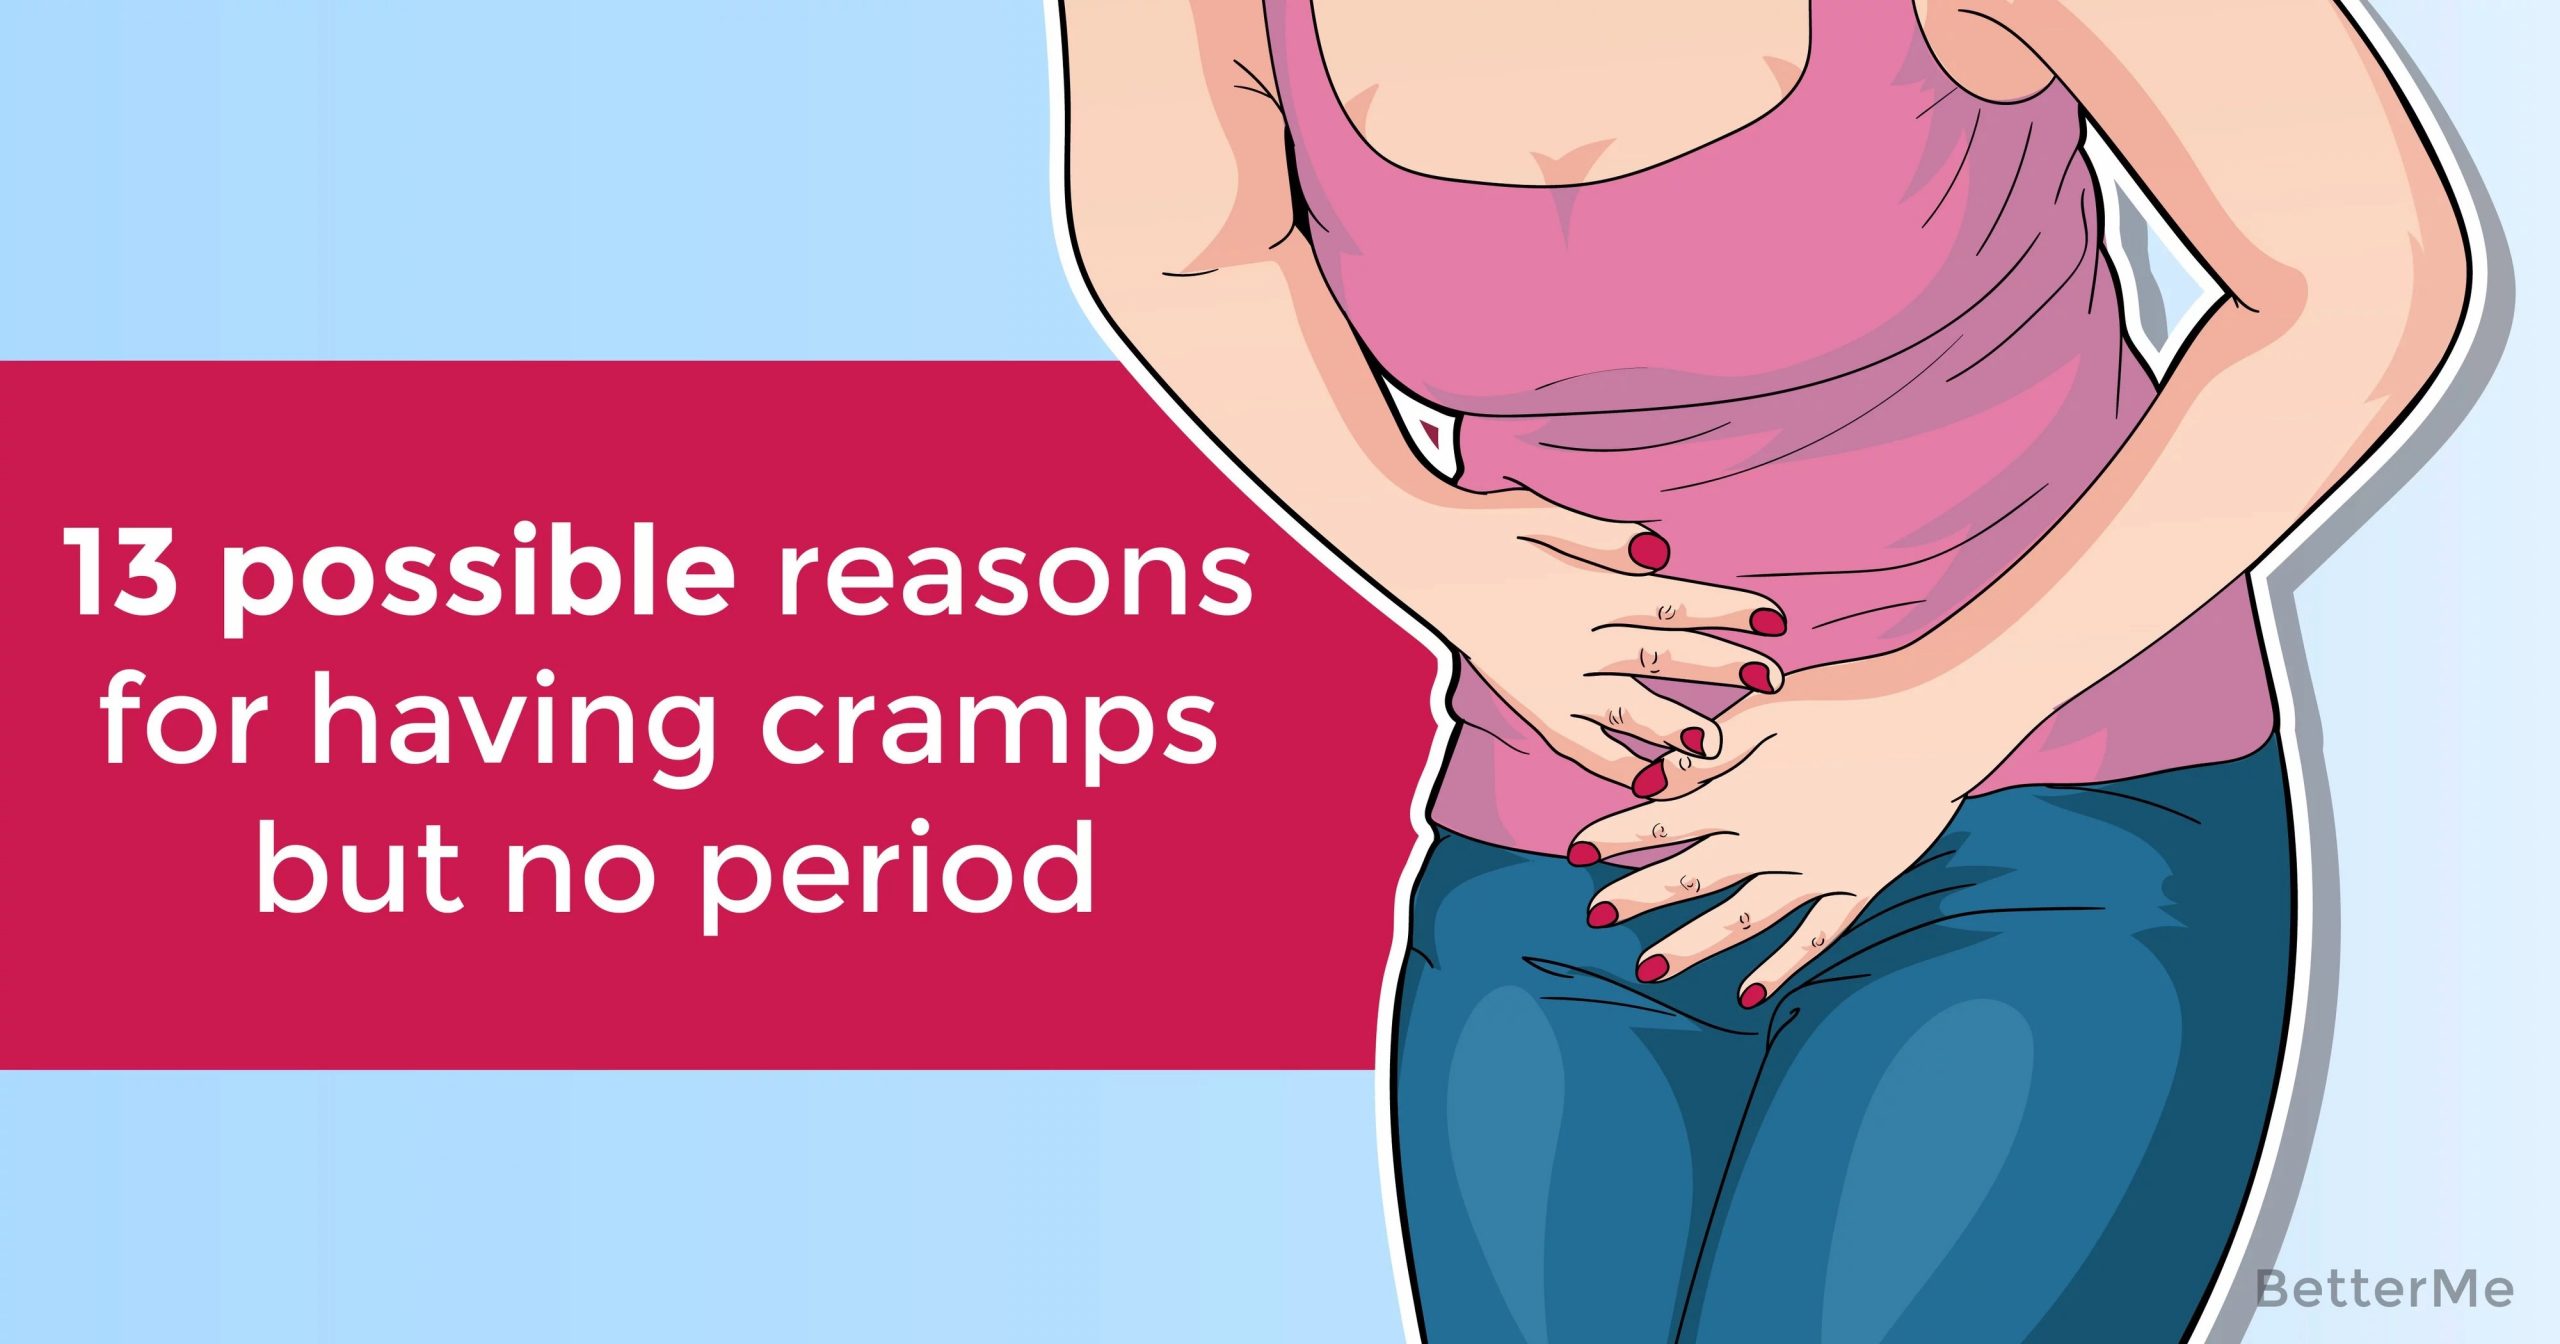 13 possible reasons for having cramps but no period